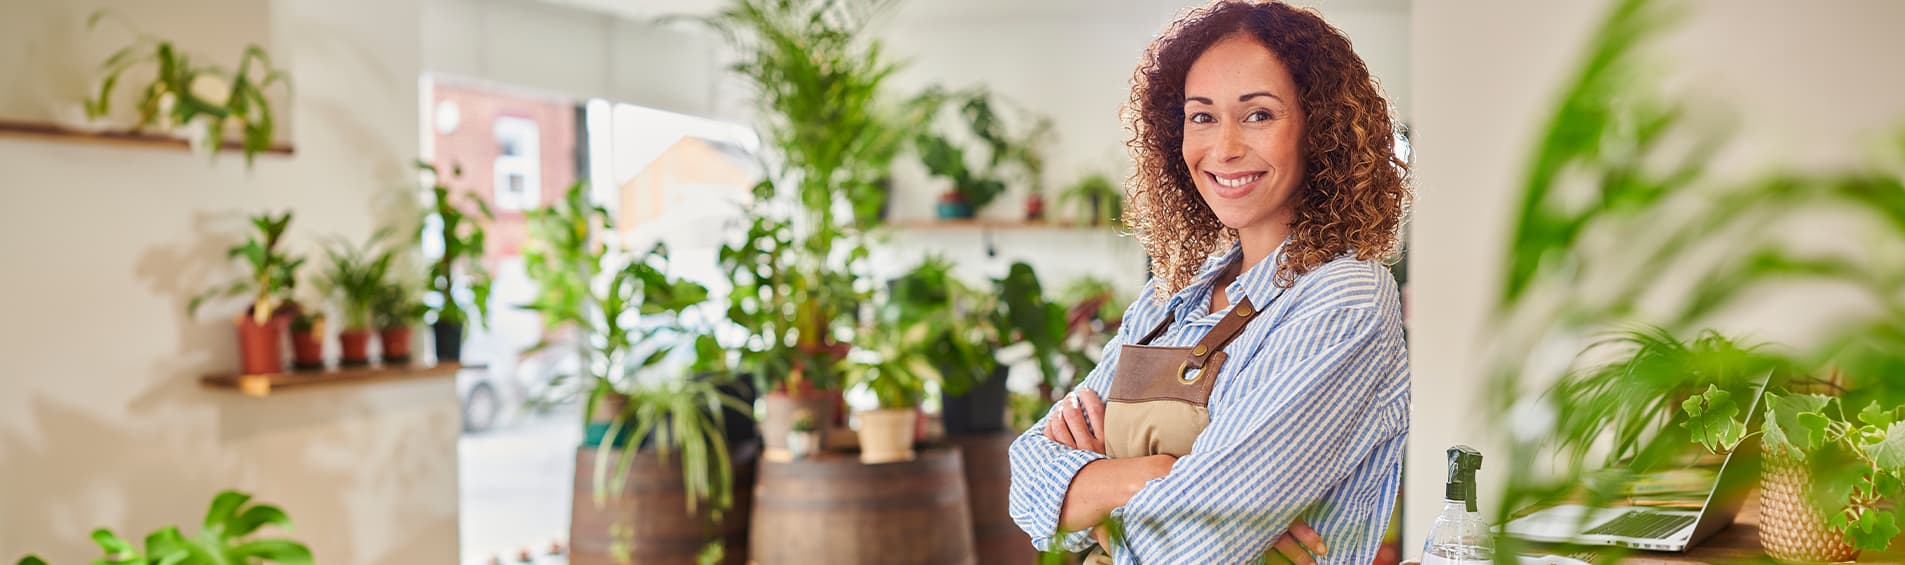 A tan skinned woman with curly hair wearing coveralls smiles in a room full of plants for sale.